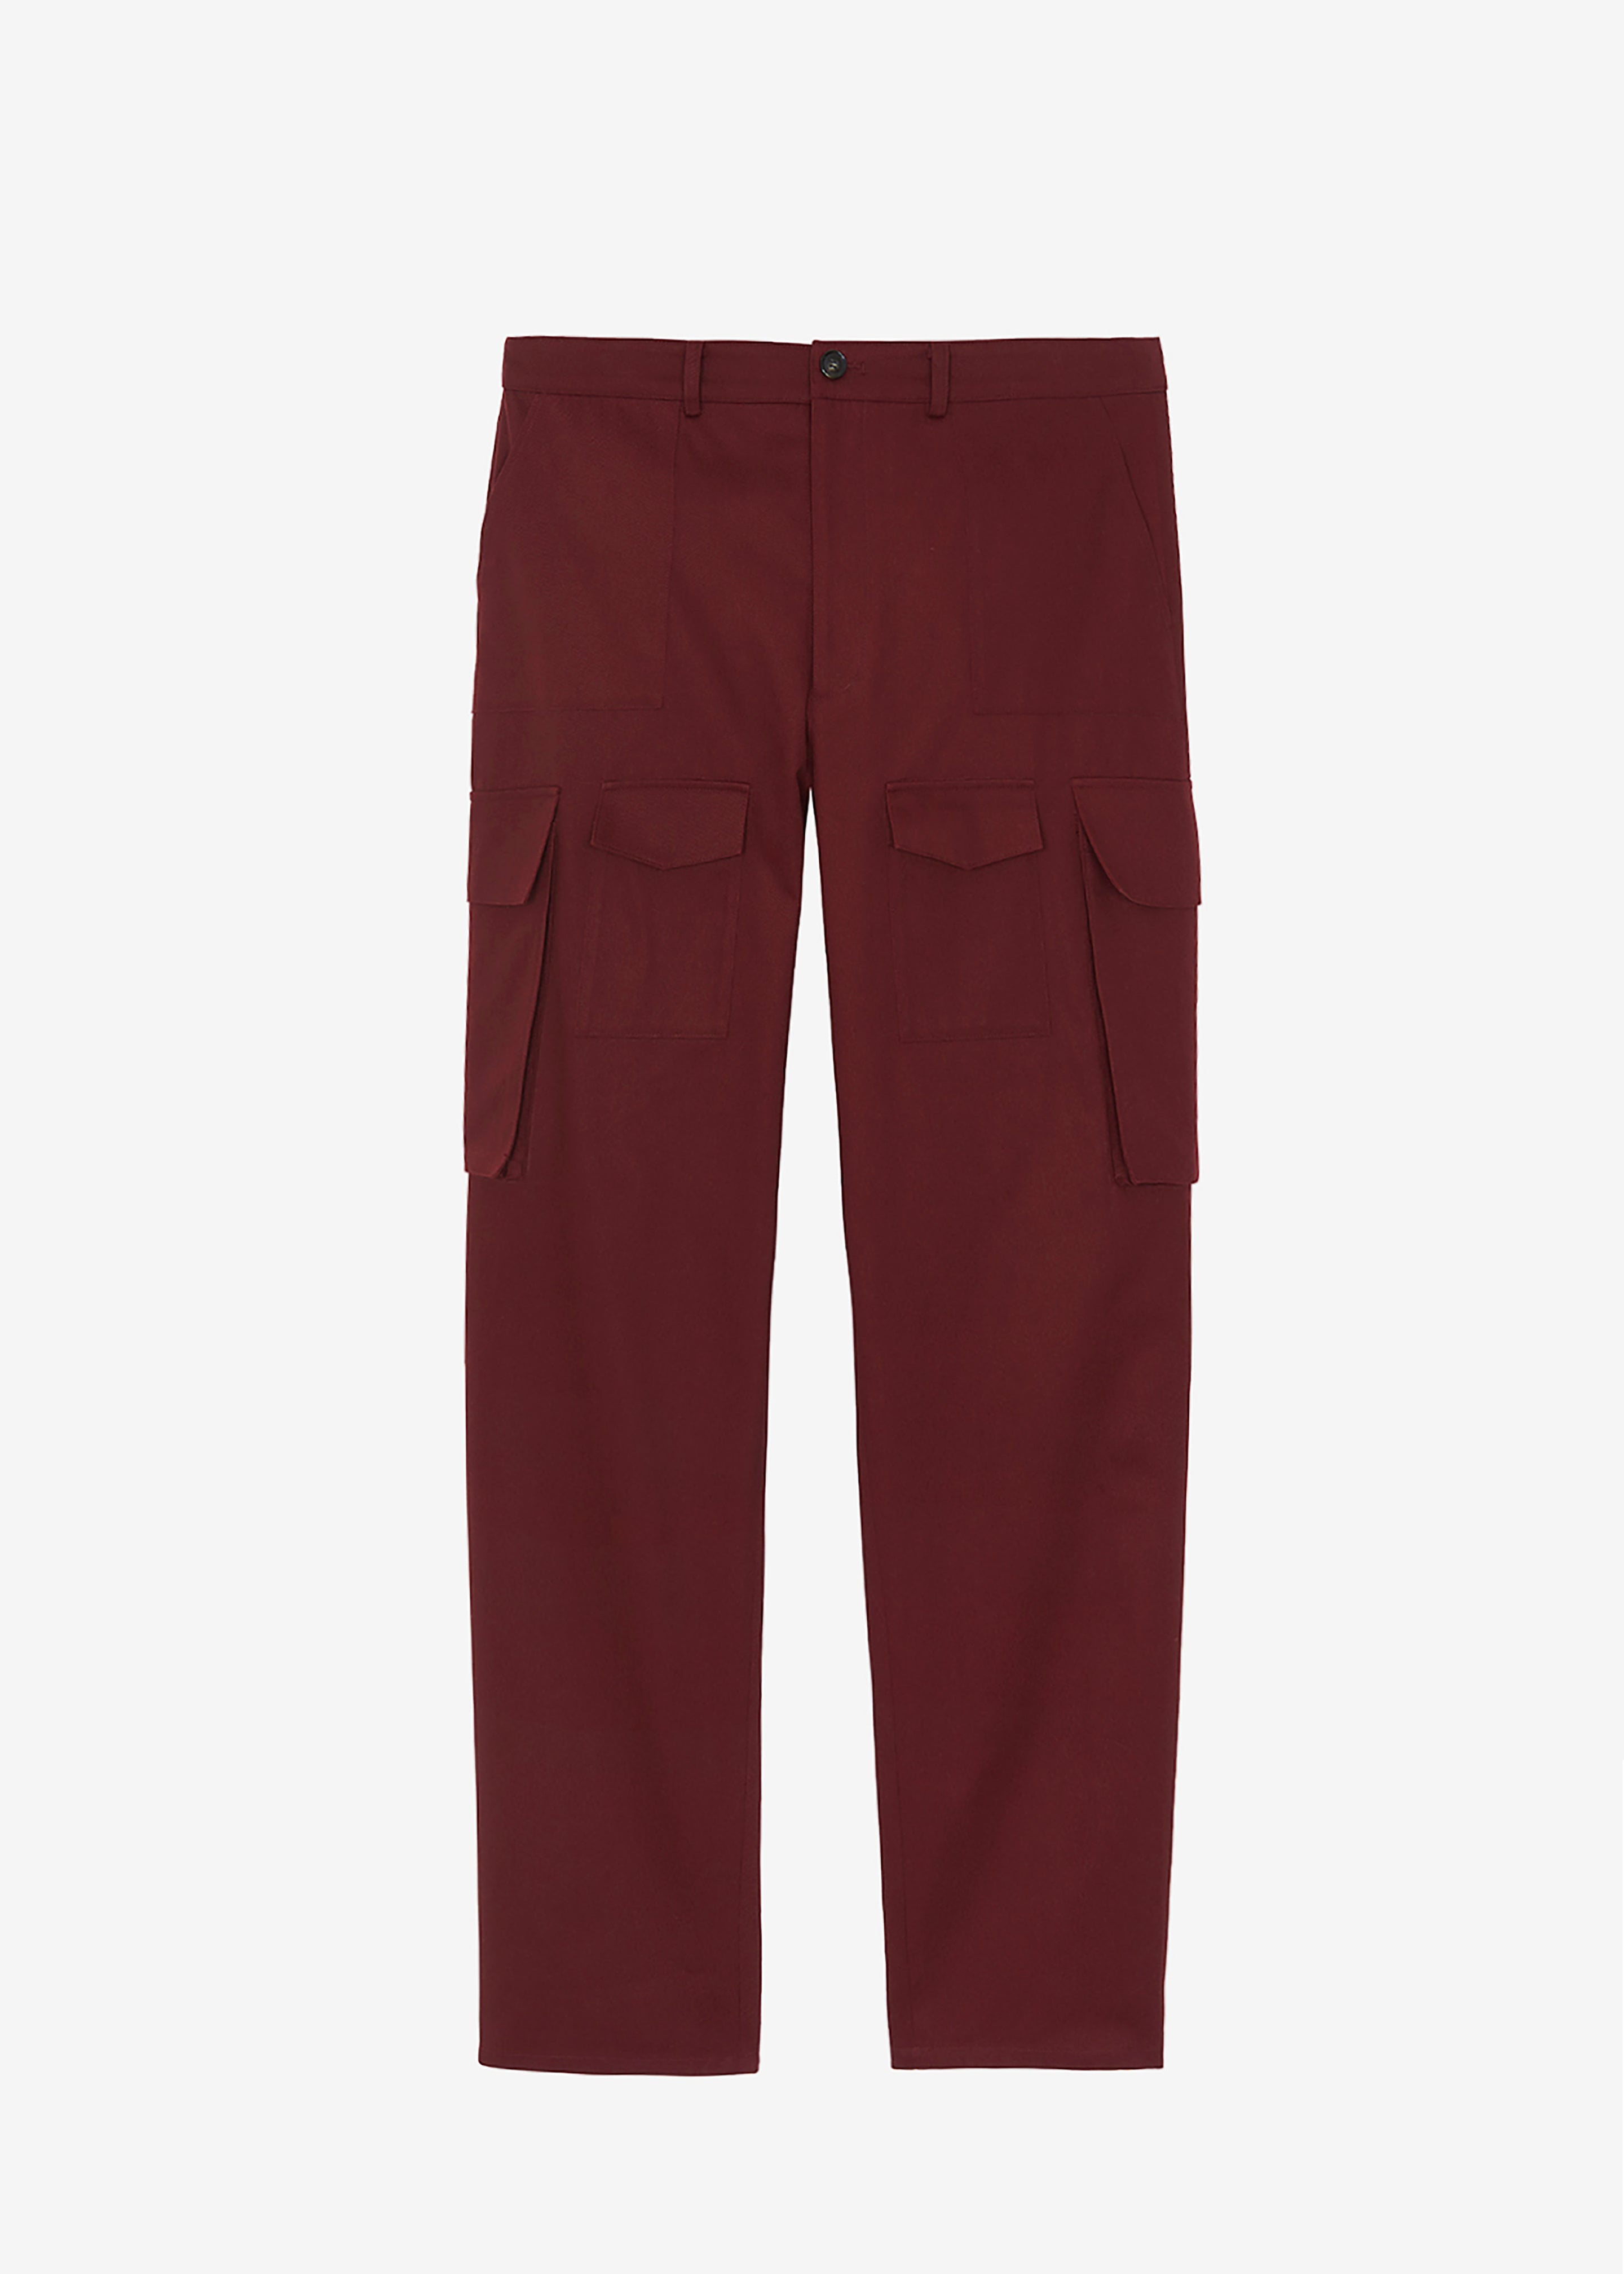 Carrie Twill Cargo Pants - Burgundy - 10